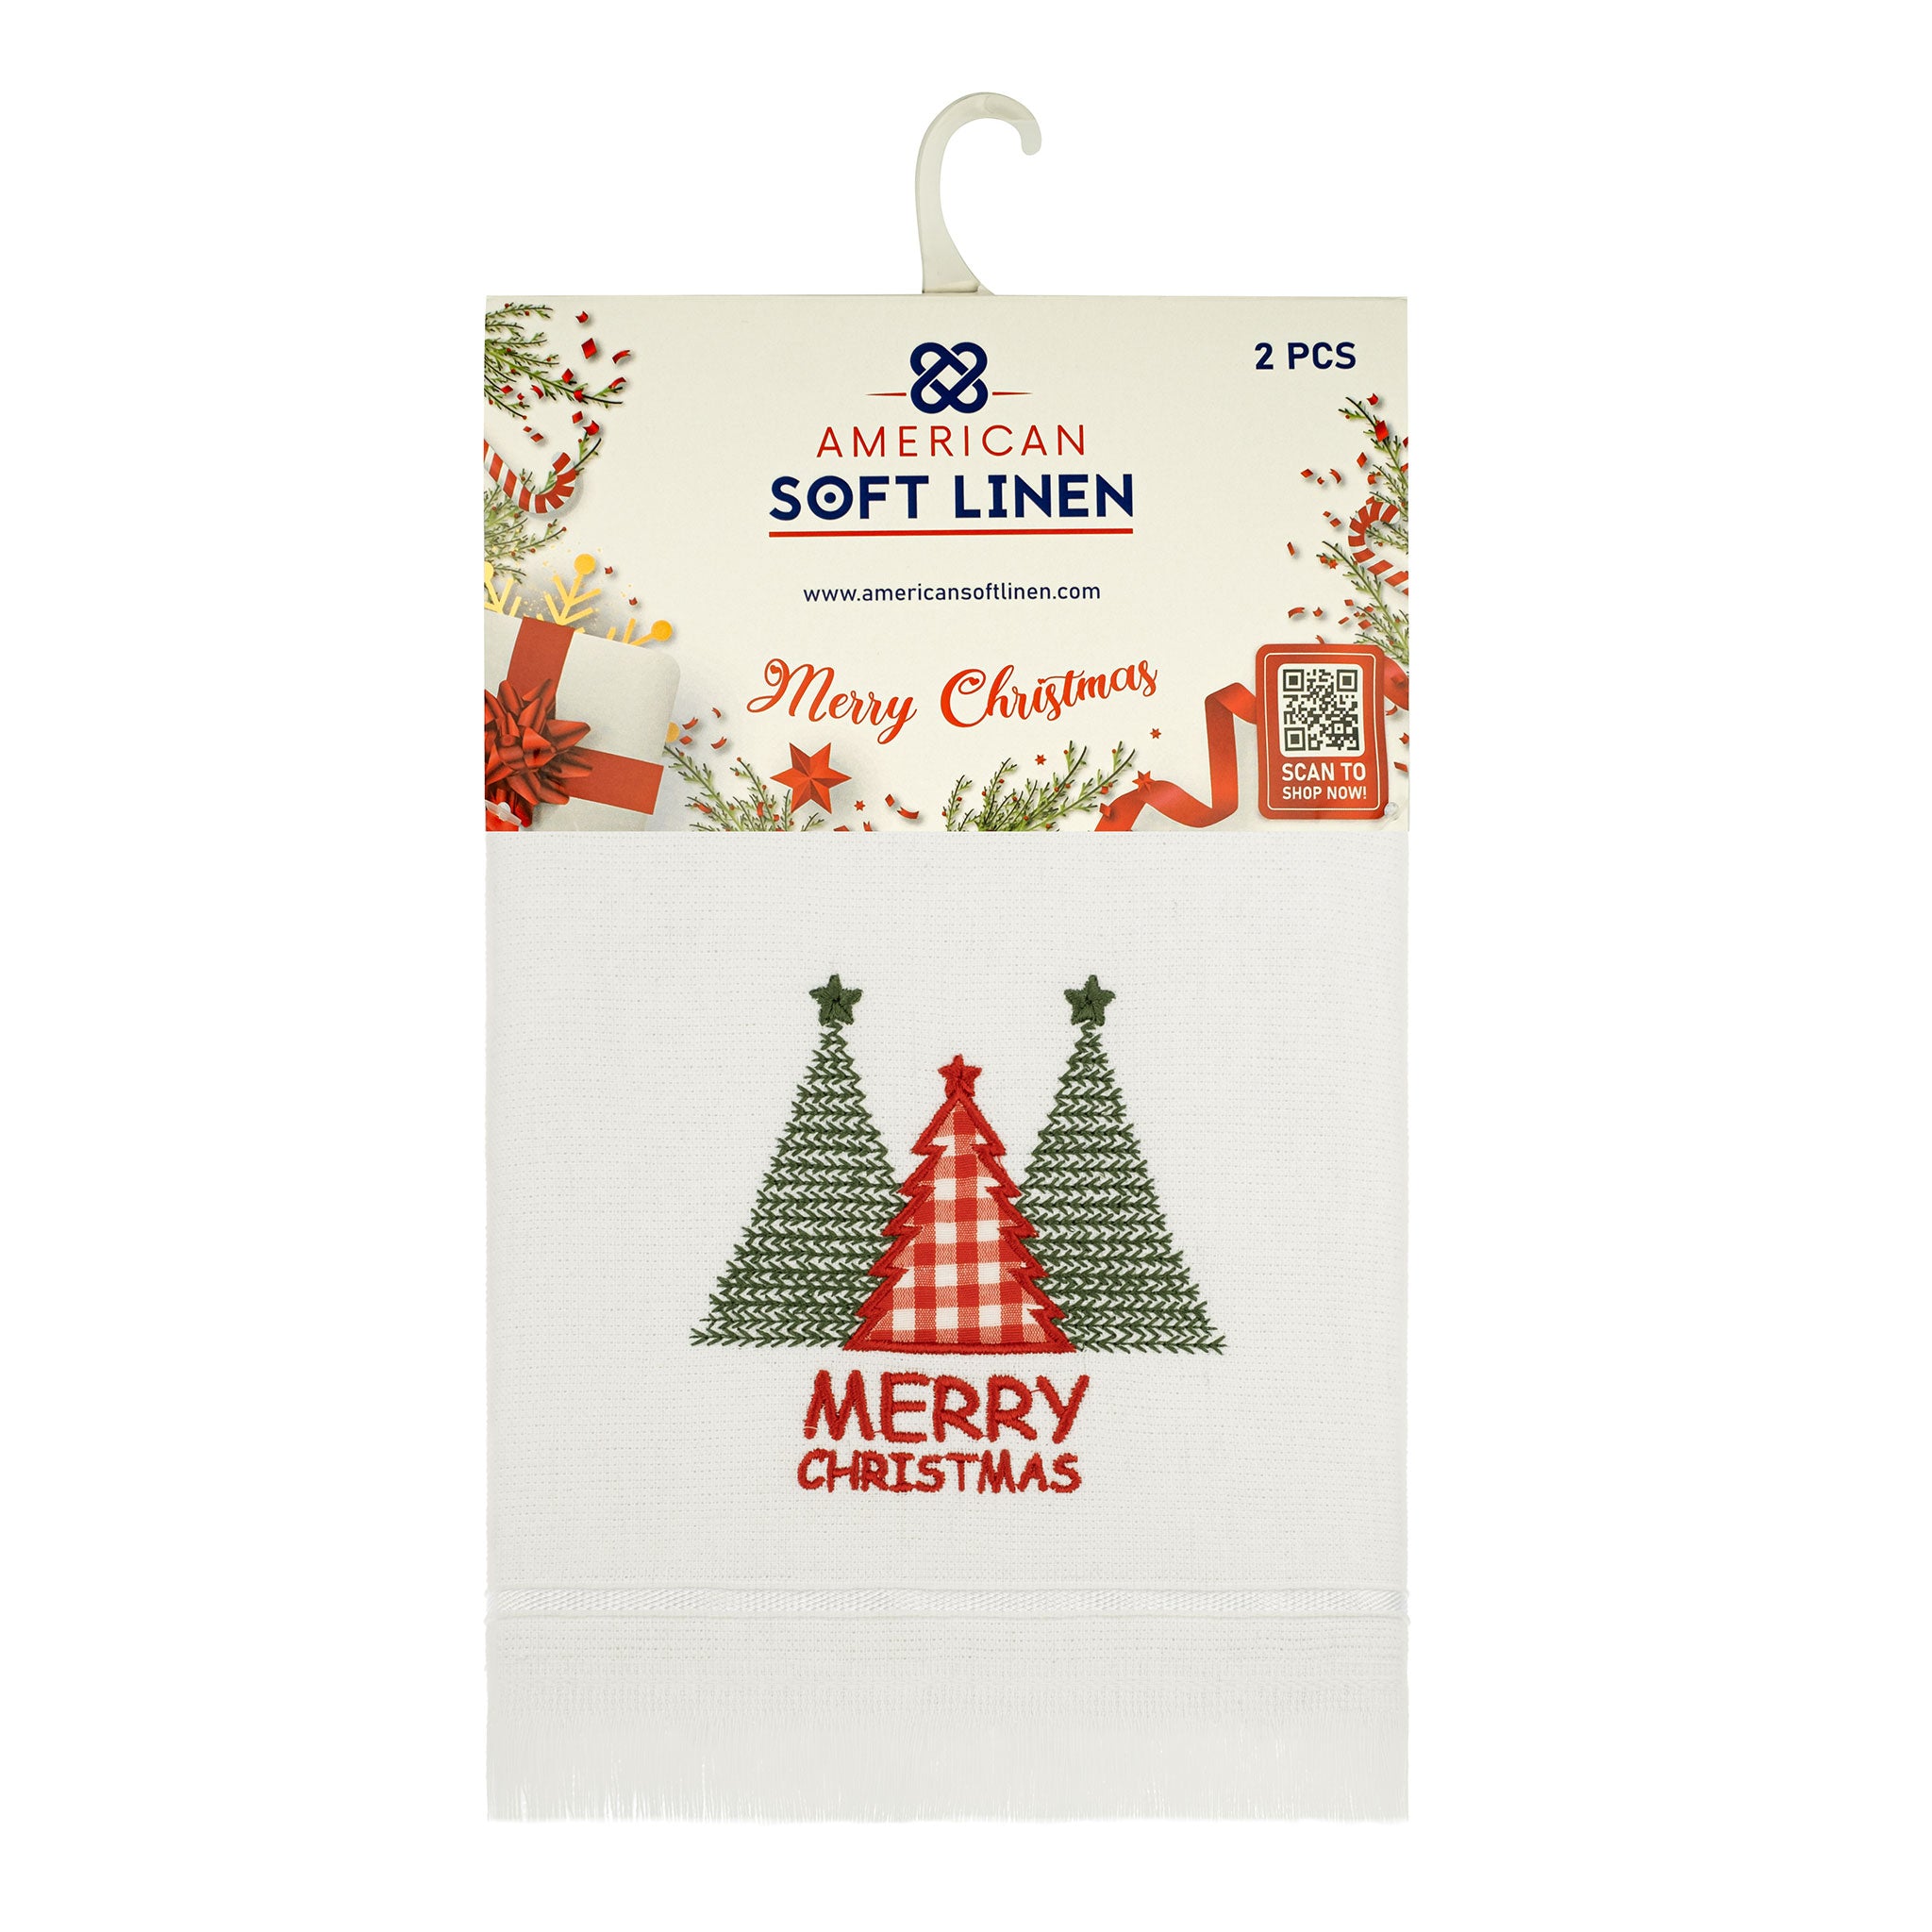 Christmas Bath Towels Embroidery Hand Towels Christmas Towels Bathroom Dish  Towels Soft Kitchen Wash Cloths Towels For Bathroom Kitchen Towels Gift